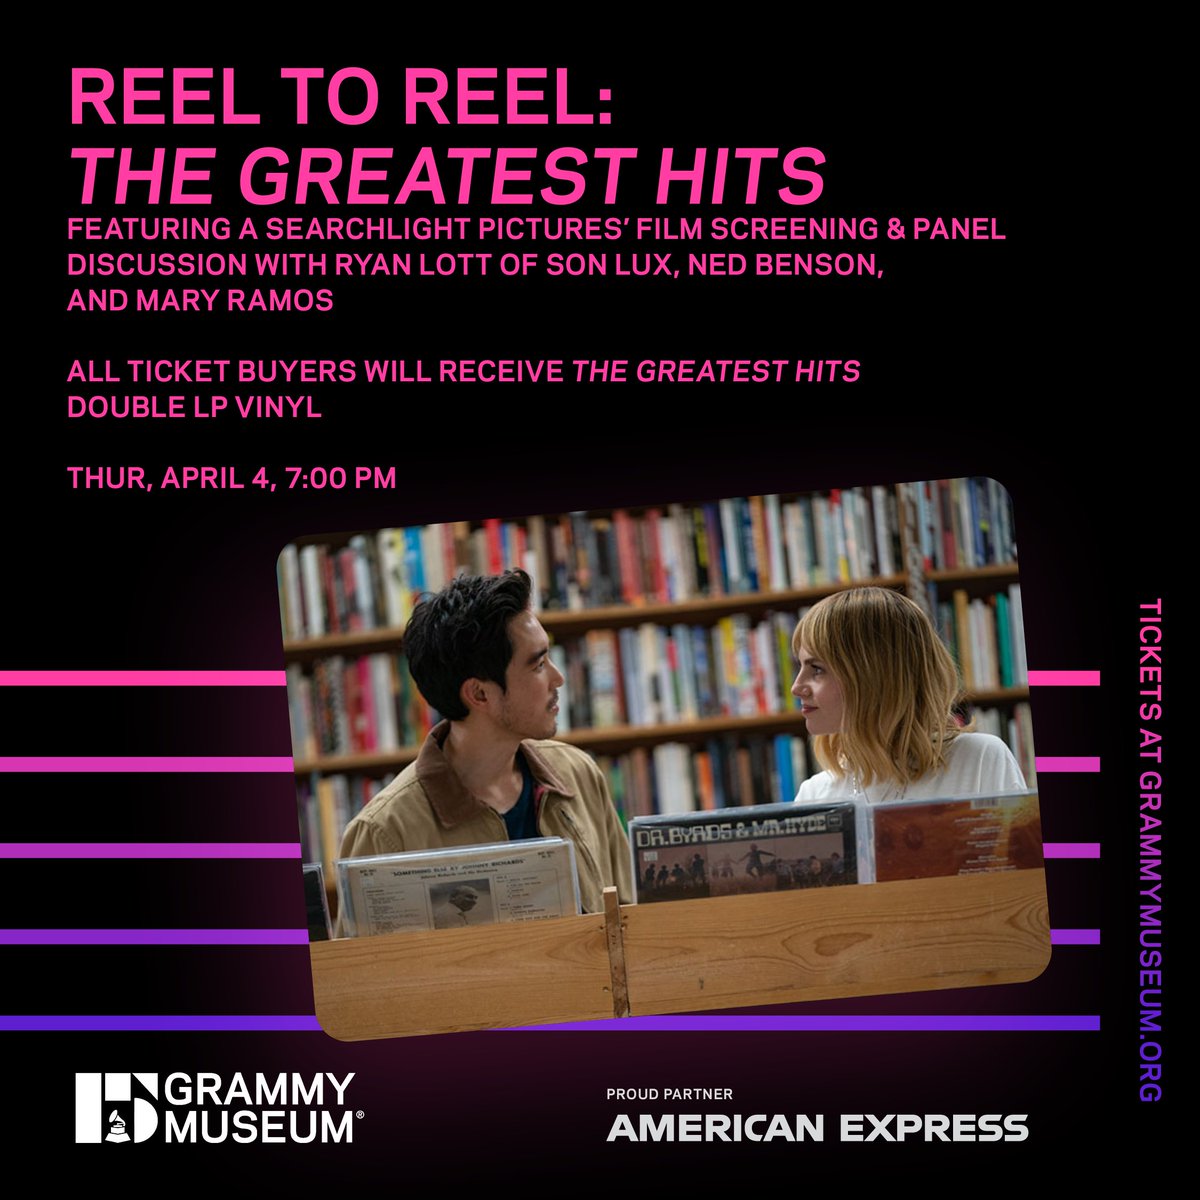 The @GRAMMYMuseum is thrilled to host a special screening of Searchlight Picture's The Greatest Hits on April 4. Don't miss out on this exclusive events! All ticket buyers will receive a Greatest Hits Double LP Vinyl. 🎟️ Tickets at bit.ly/reeltoreel24